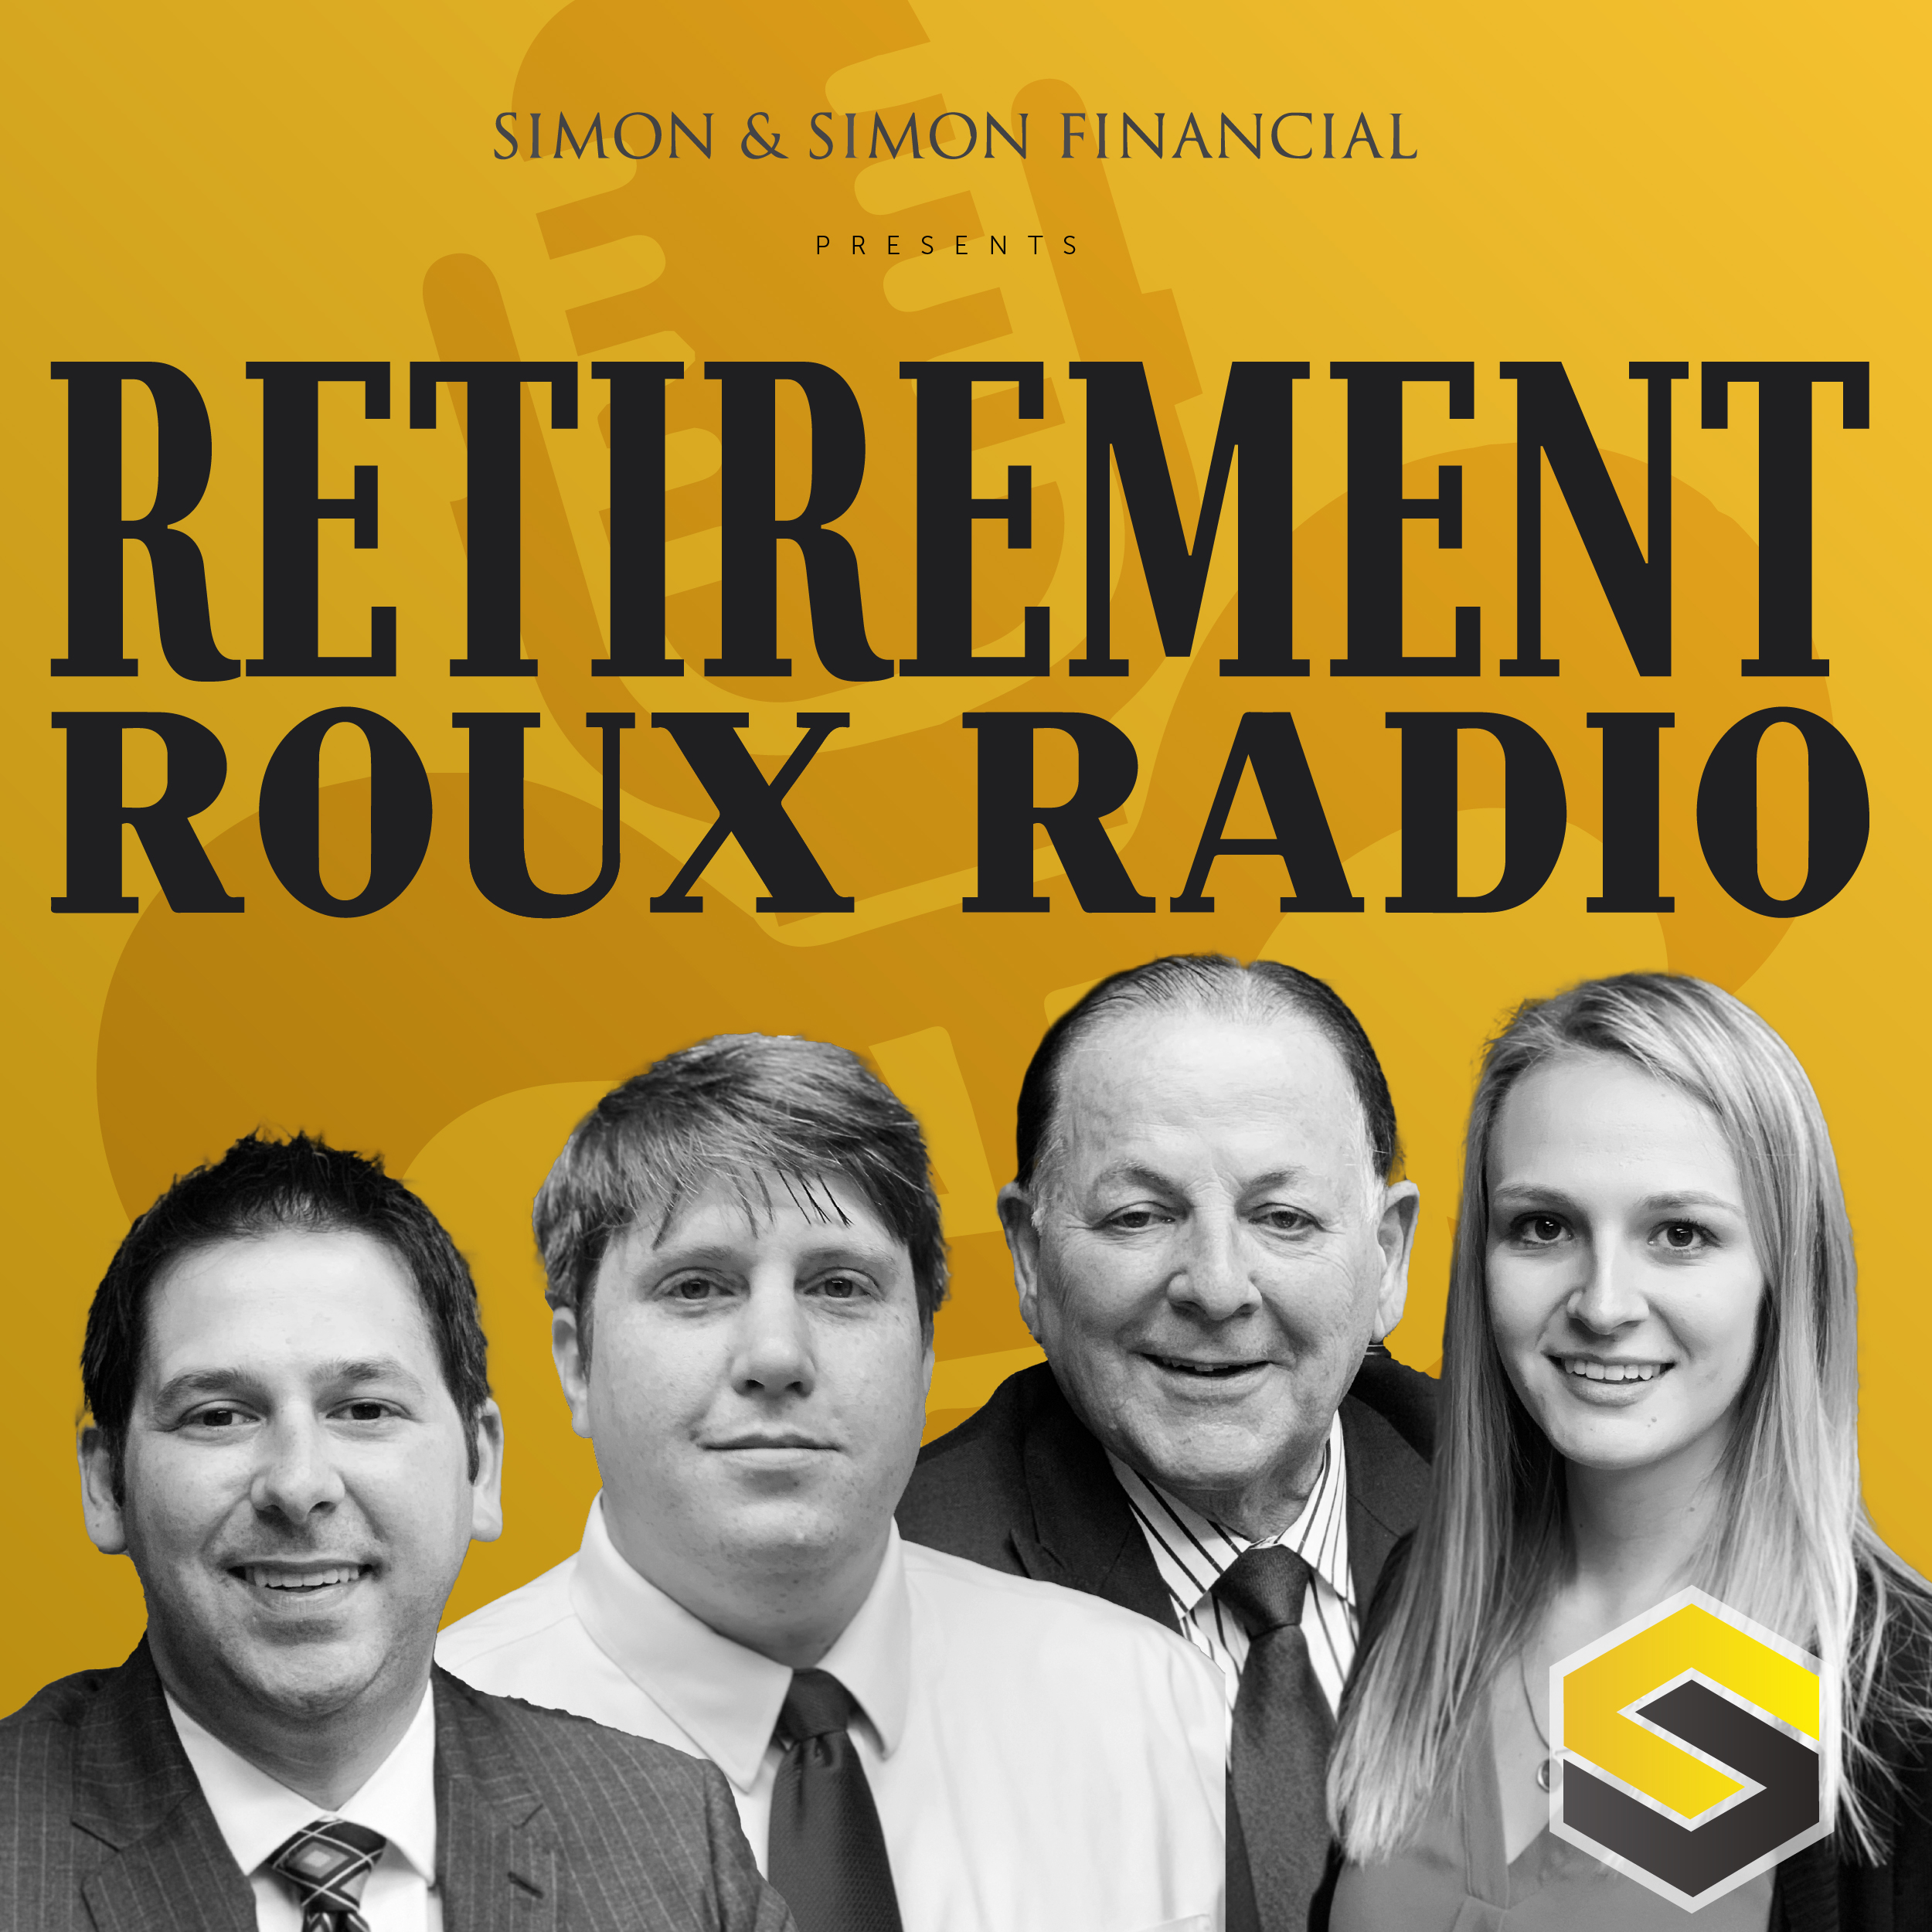 Inflation, Market Volatility, and Recession Swirling, Make Sure Your Retirement Plan is Ready.